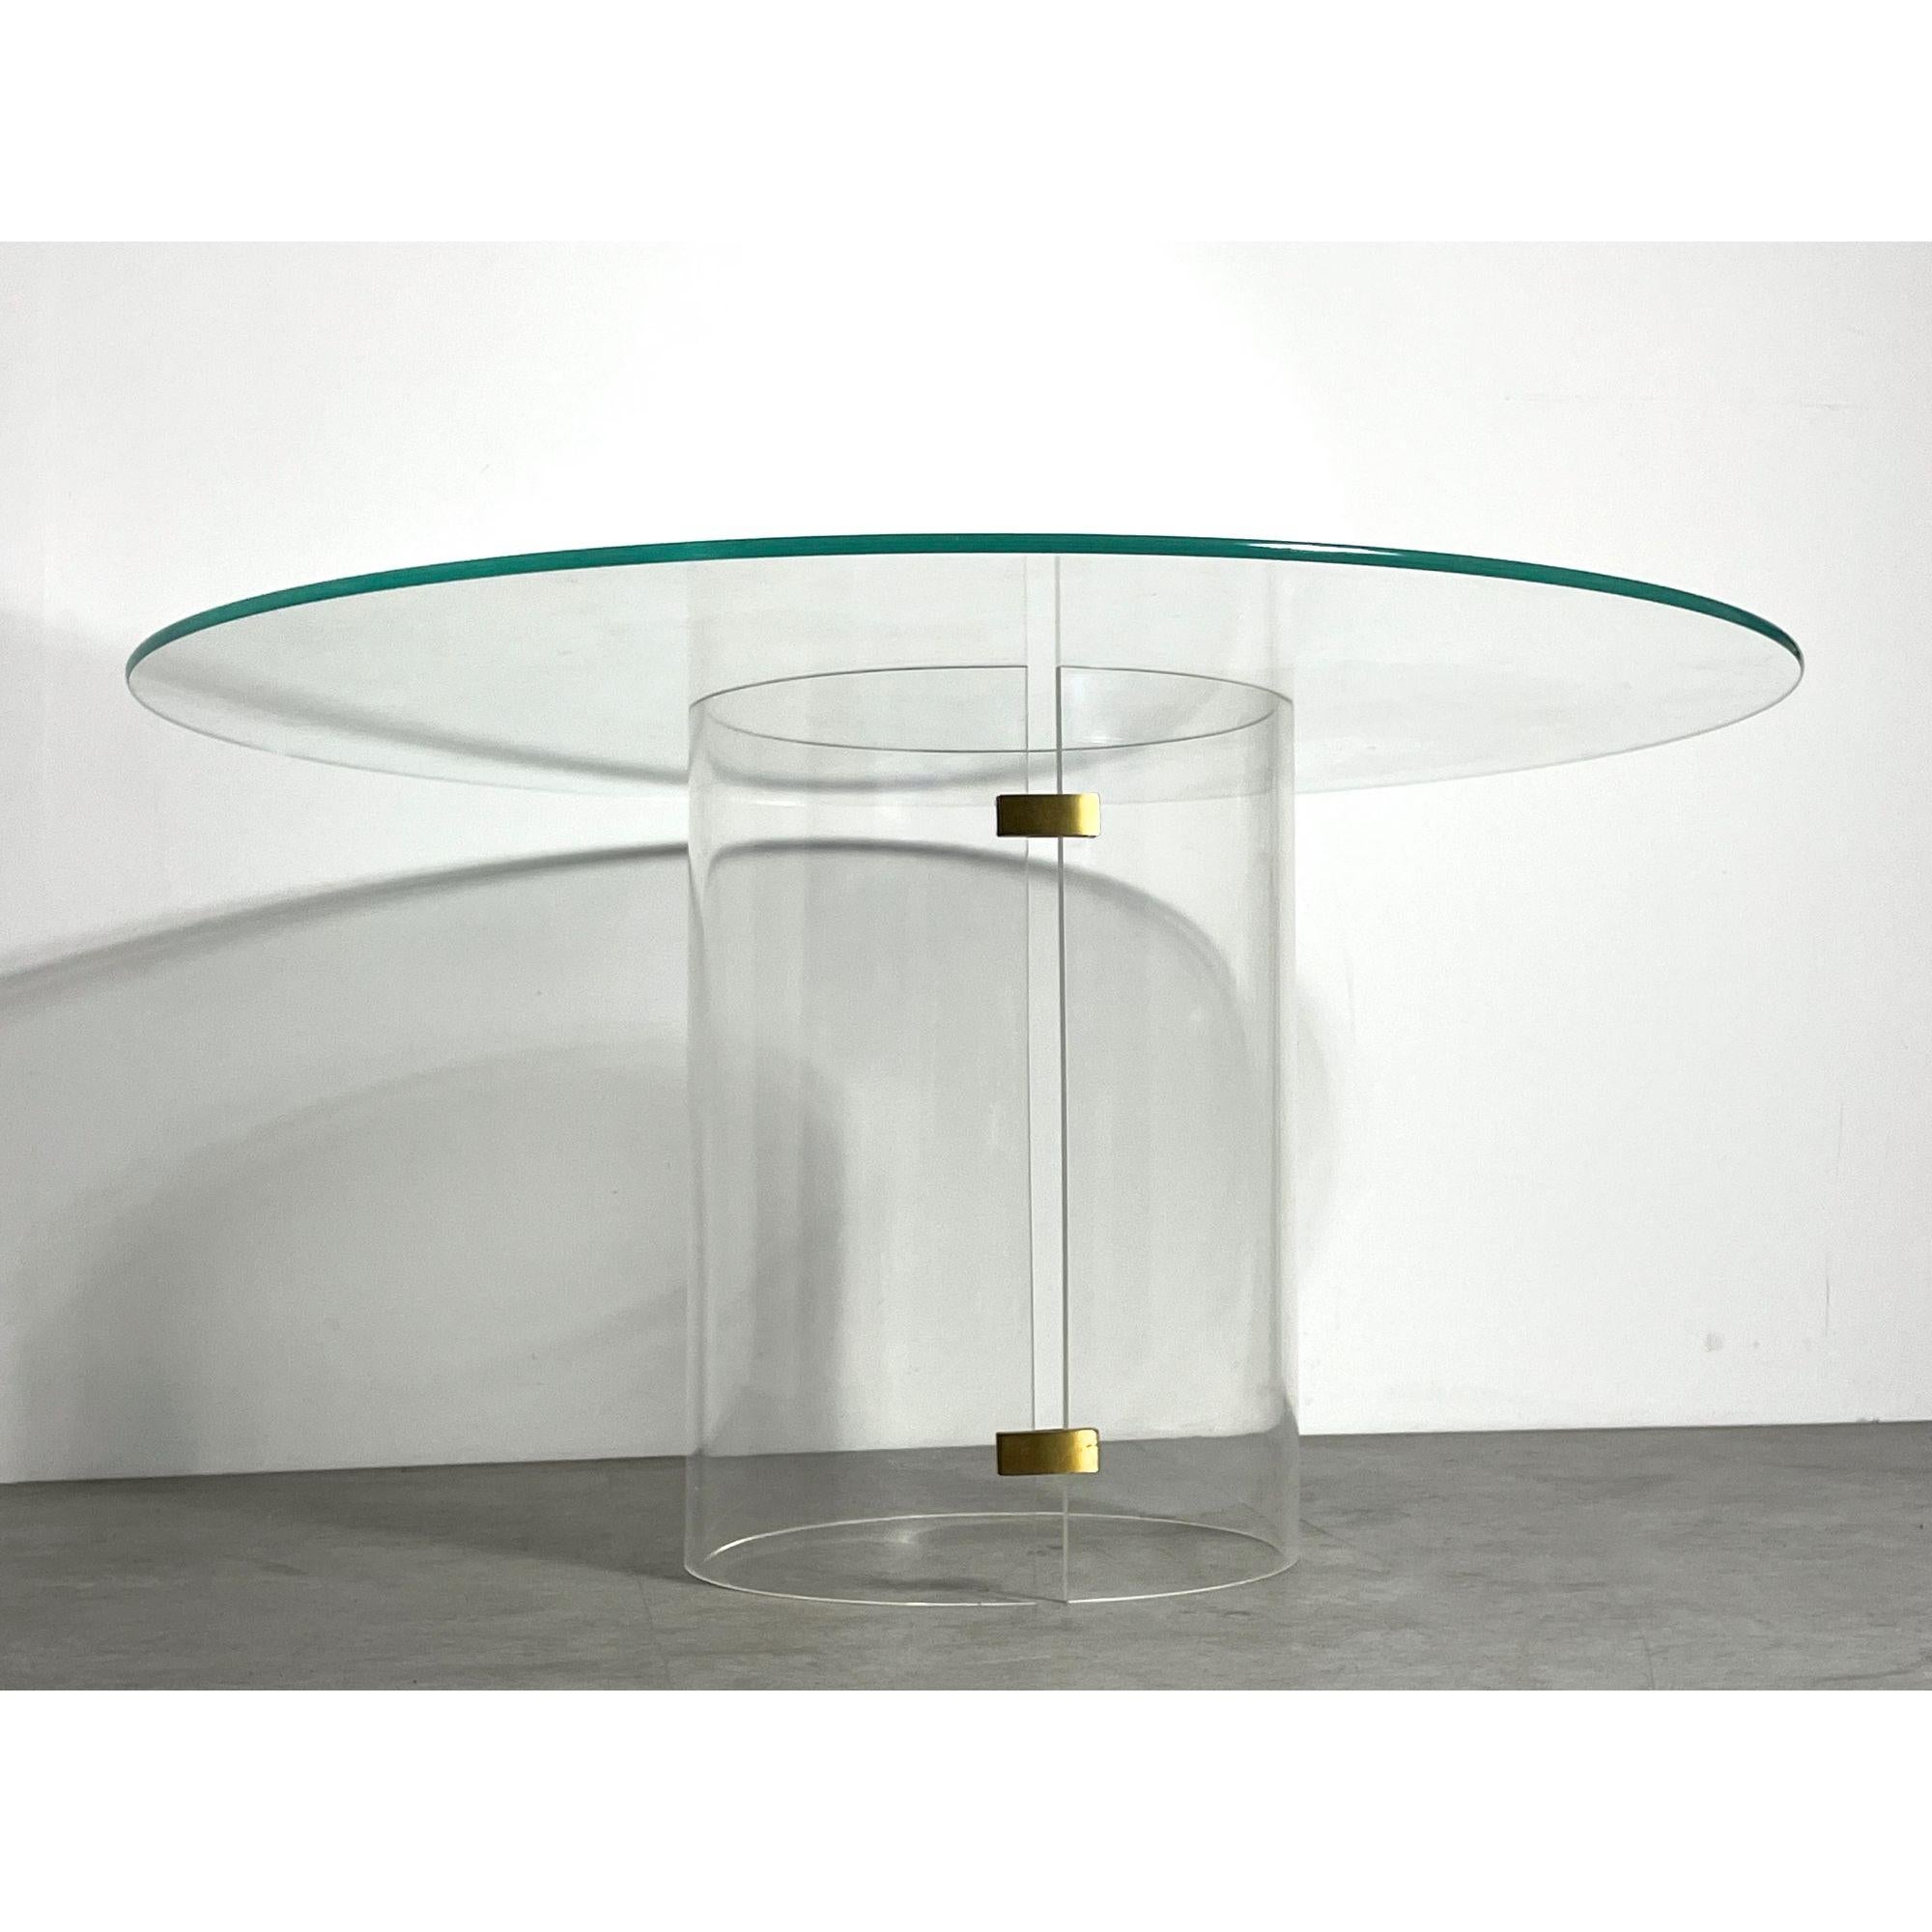 Mid-Century Modern Vintage Round Pedestal Dining Table in Lucite Brass and Glass circa 1970s For Sale